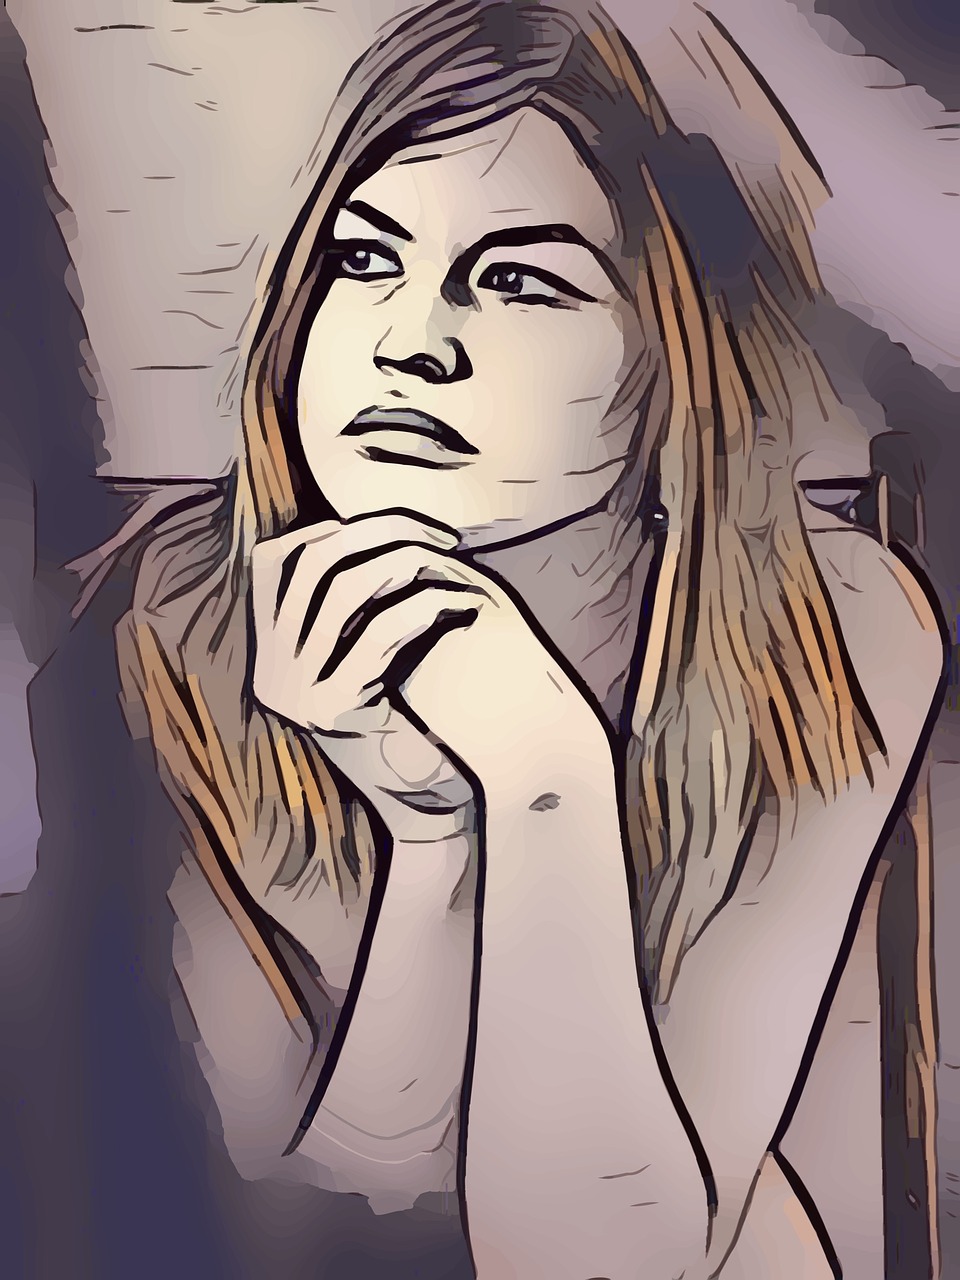 a drawing of a woman with her hand on her chin, a digital painting, digital art, graphic novel style, portrait of depressed teen, relaxed expression, heavy outlines